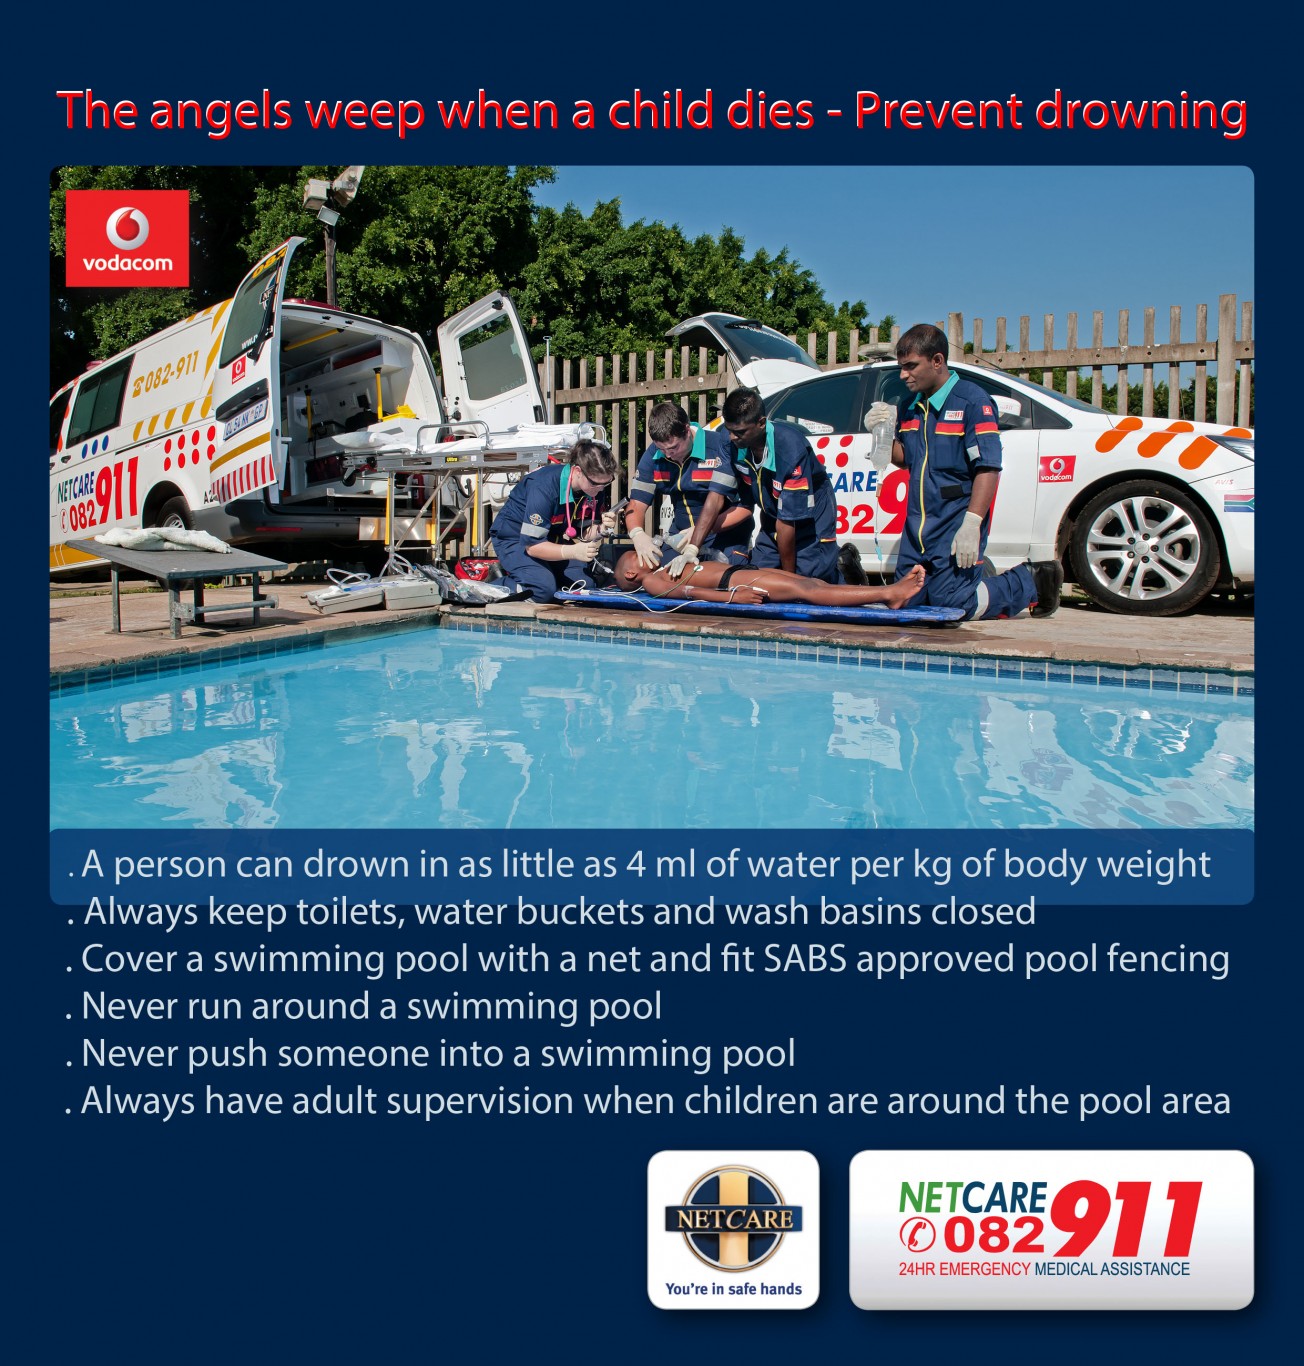 3 Year old resuscitated after drowning in a swimming pool.